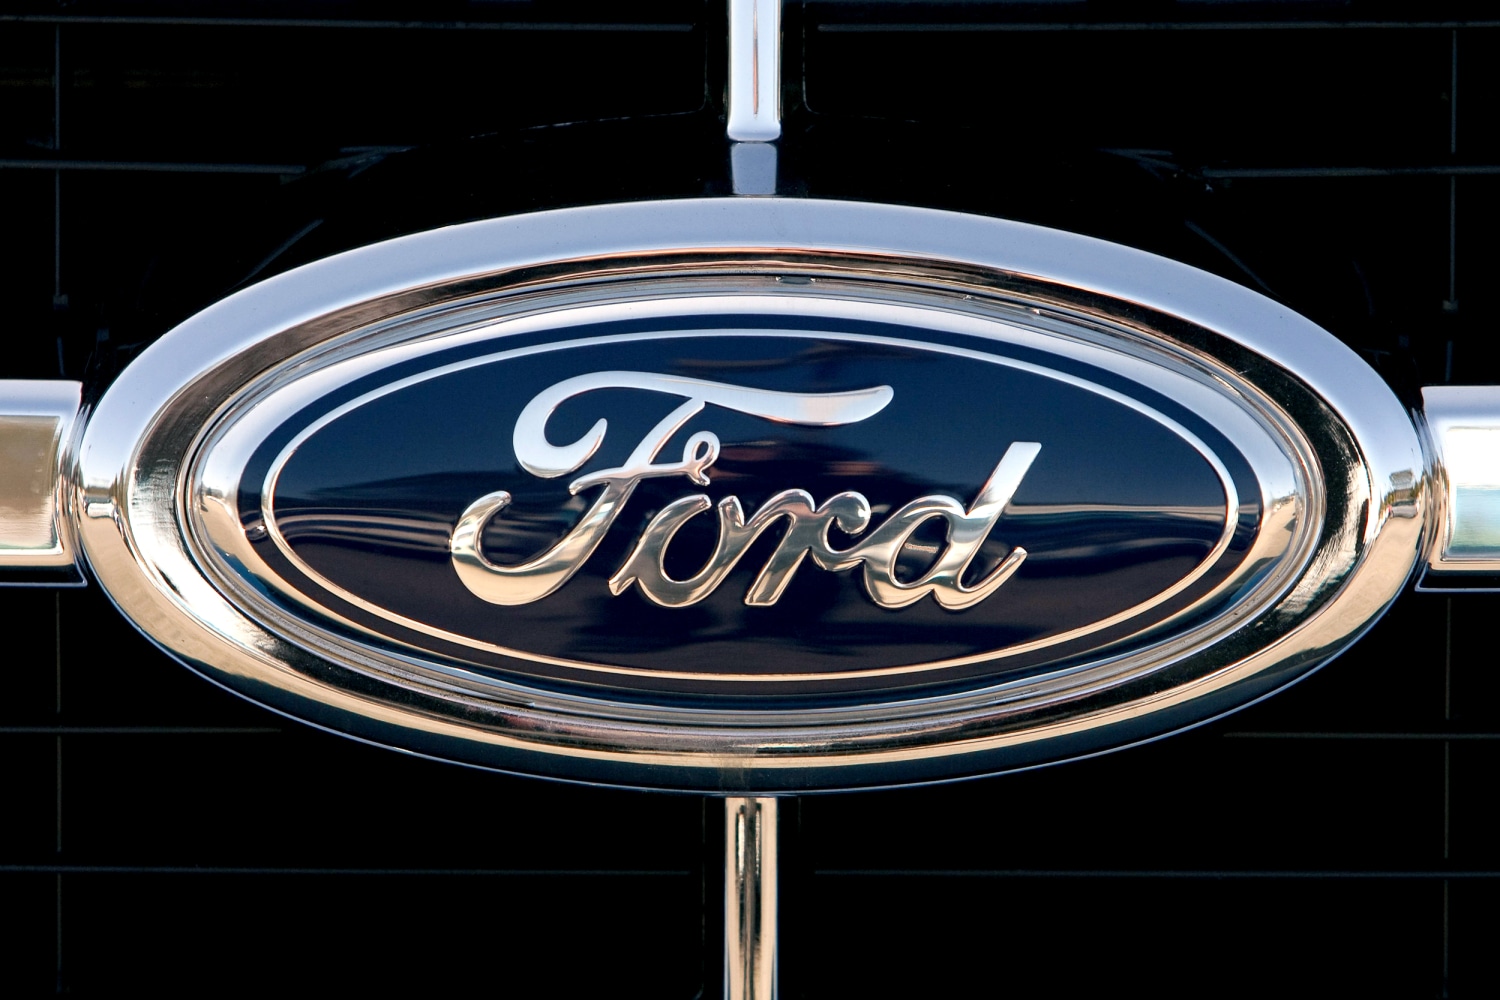 Which cars have appeared on the Ford's recall list?